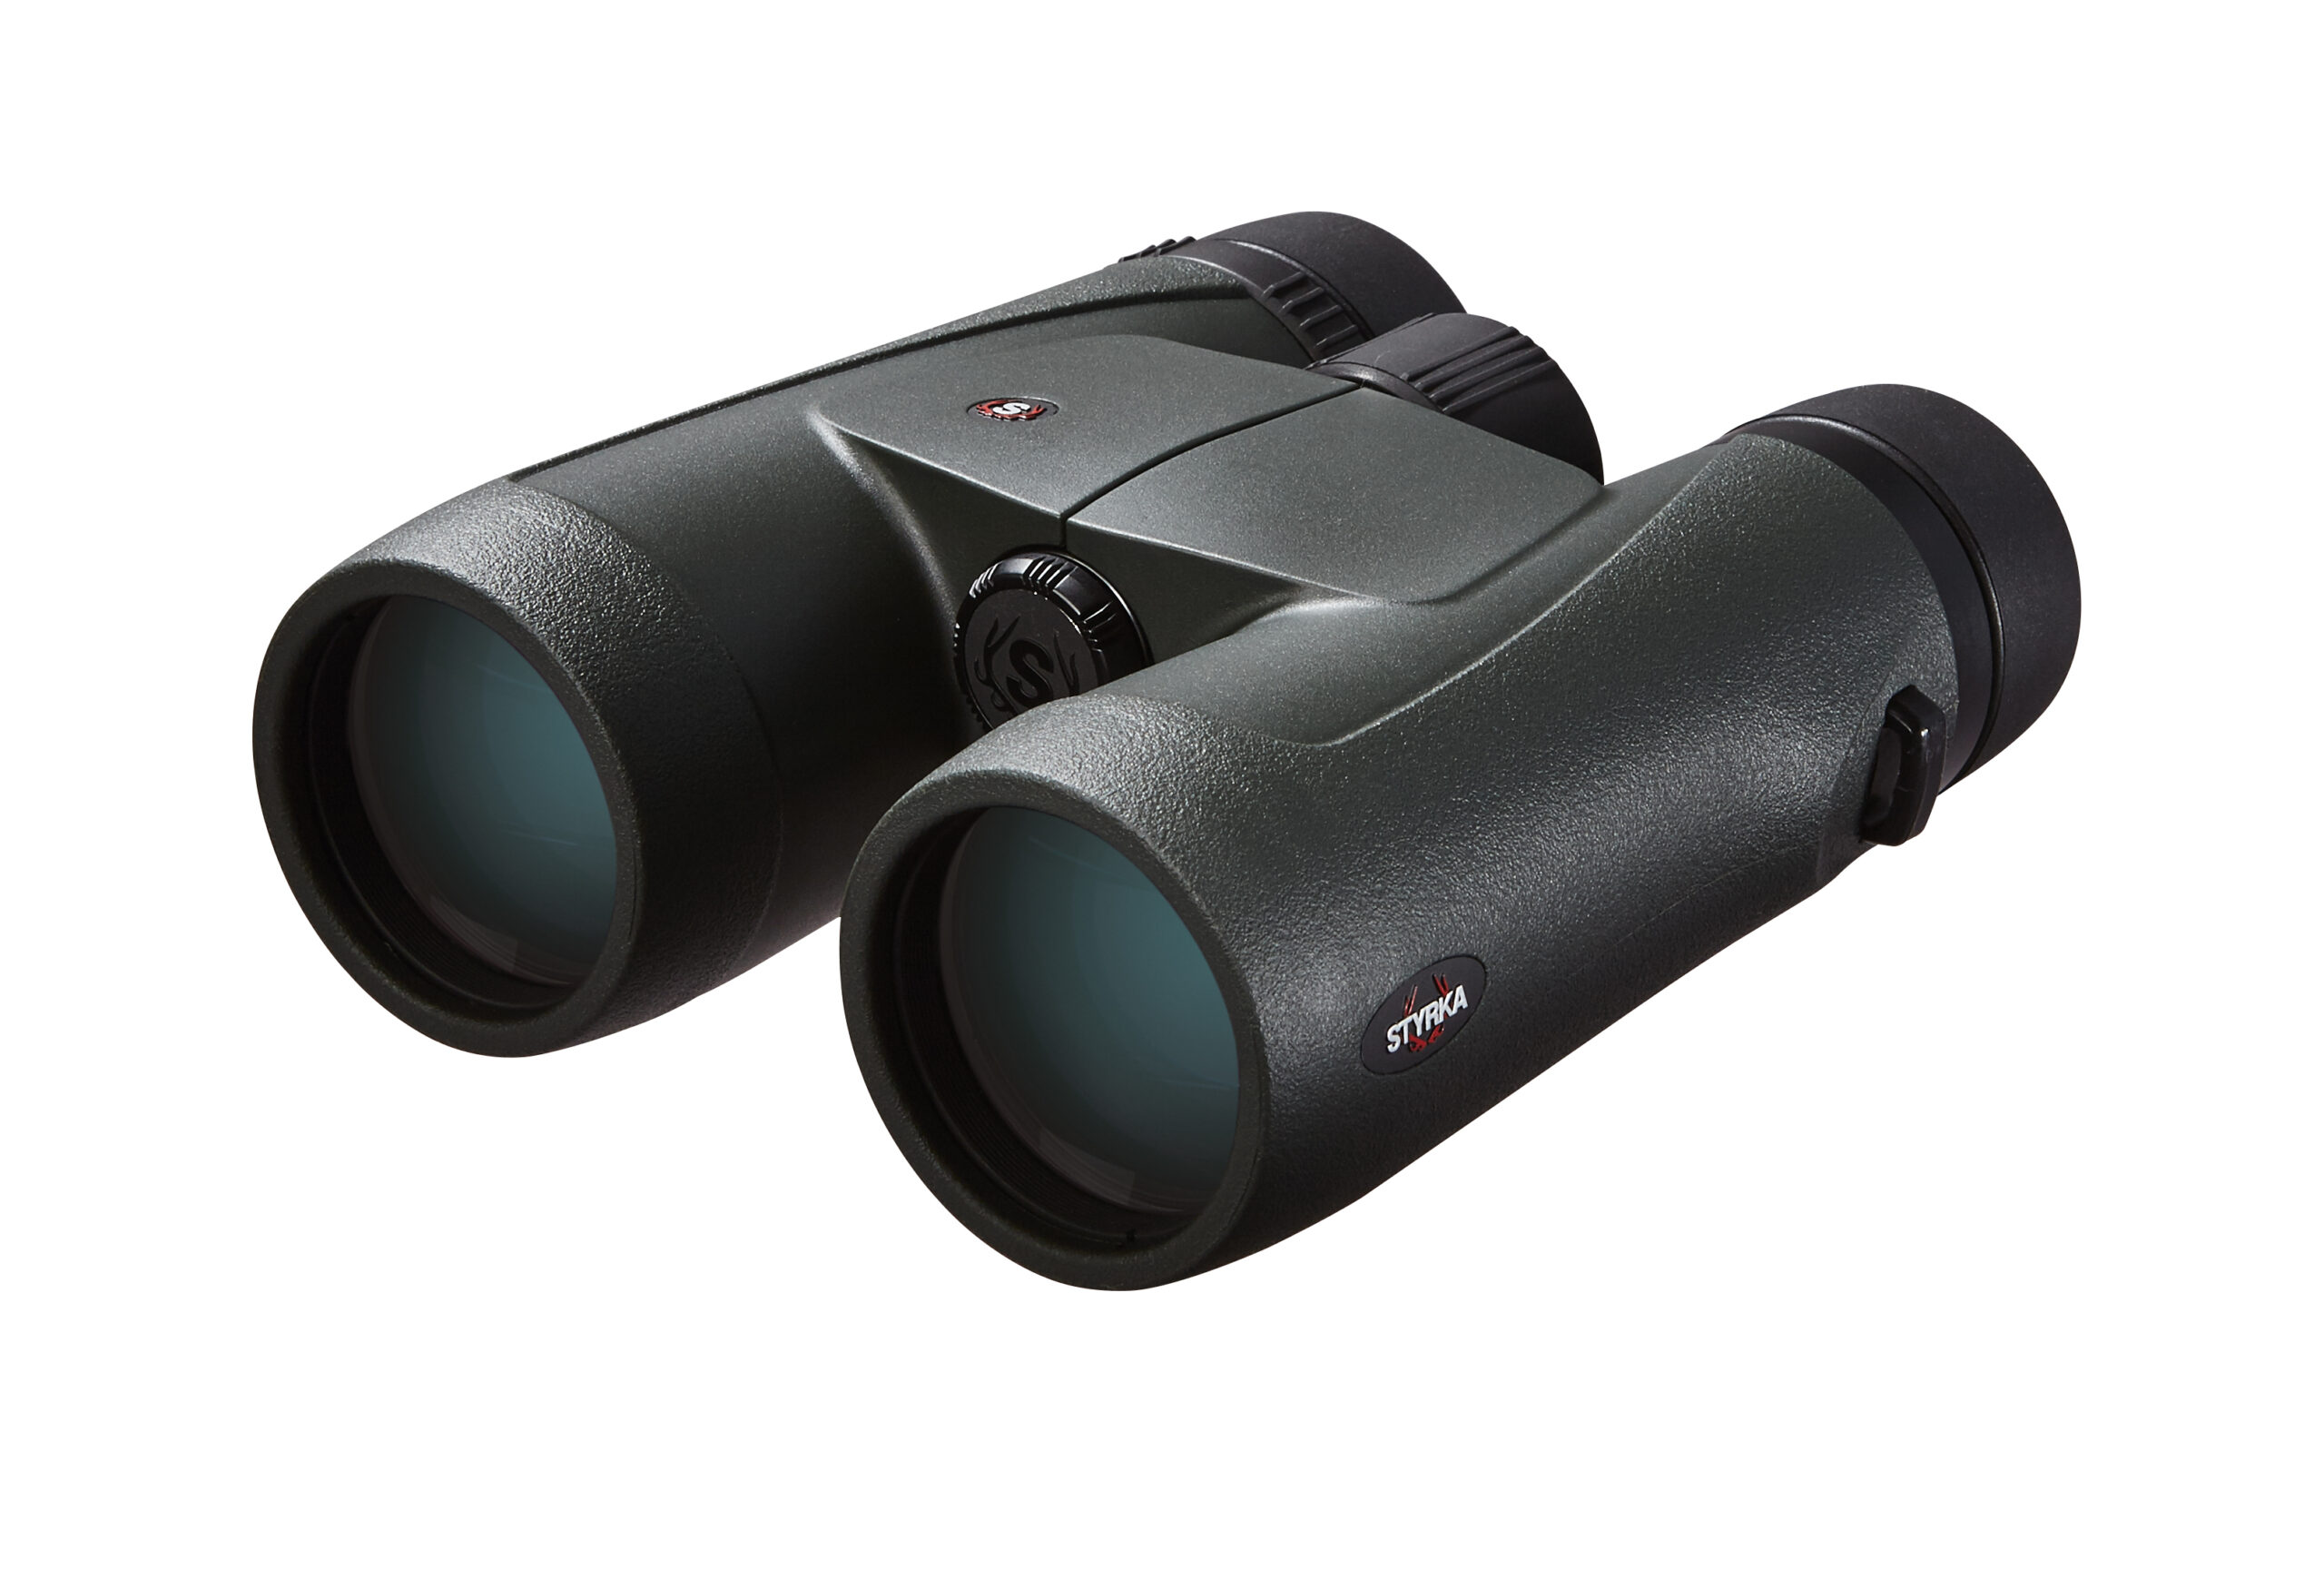 A pair of black binoculars on a white background.